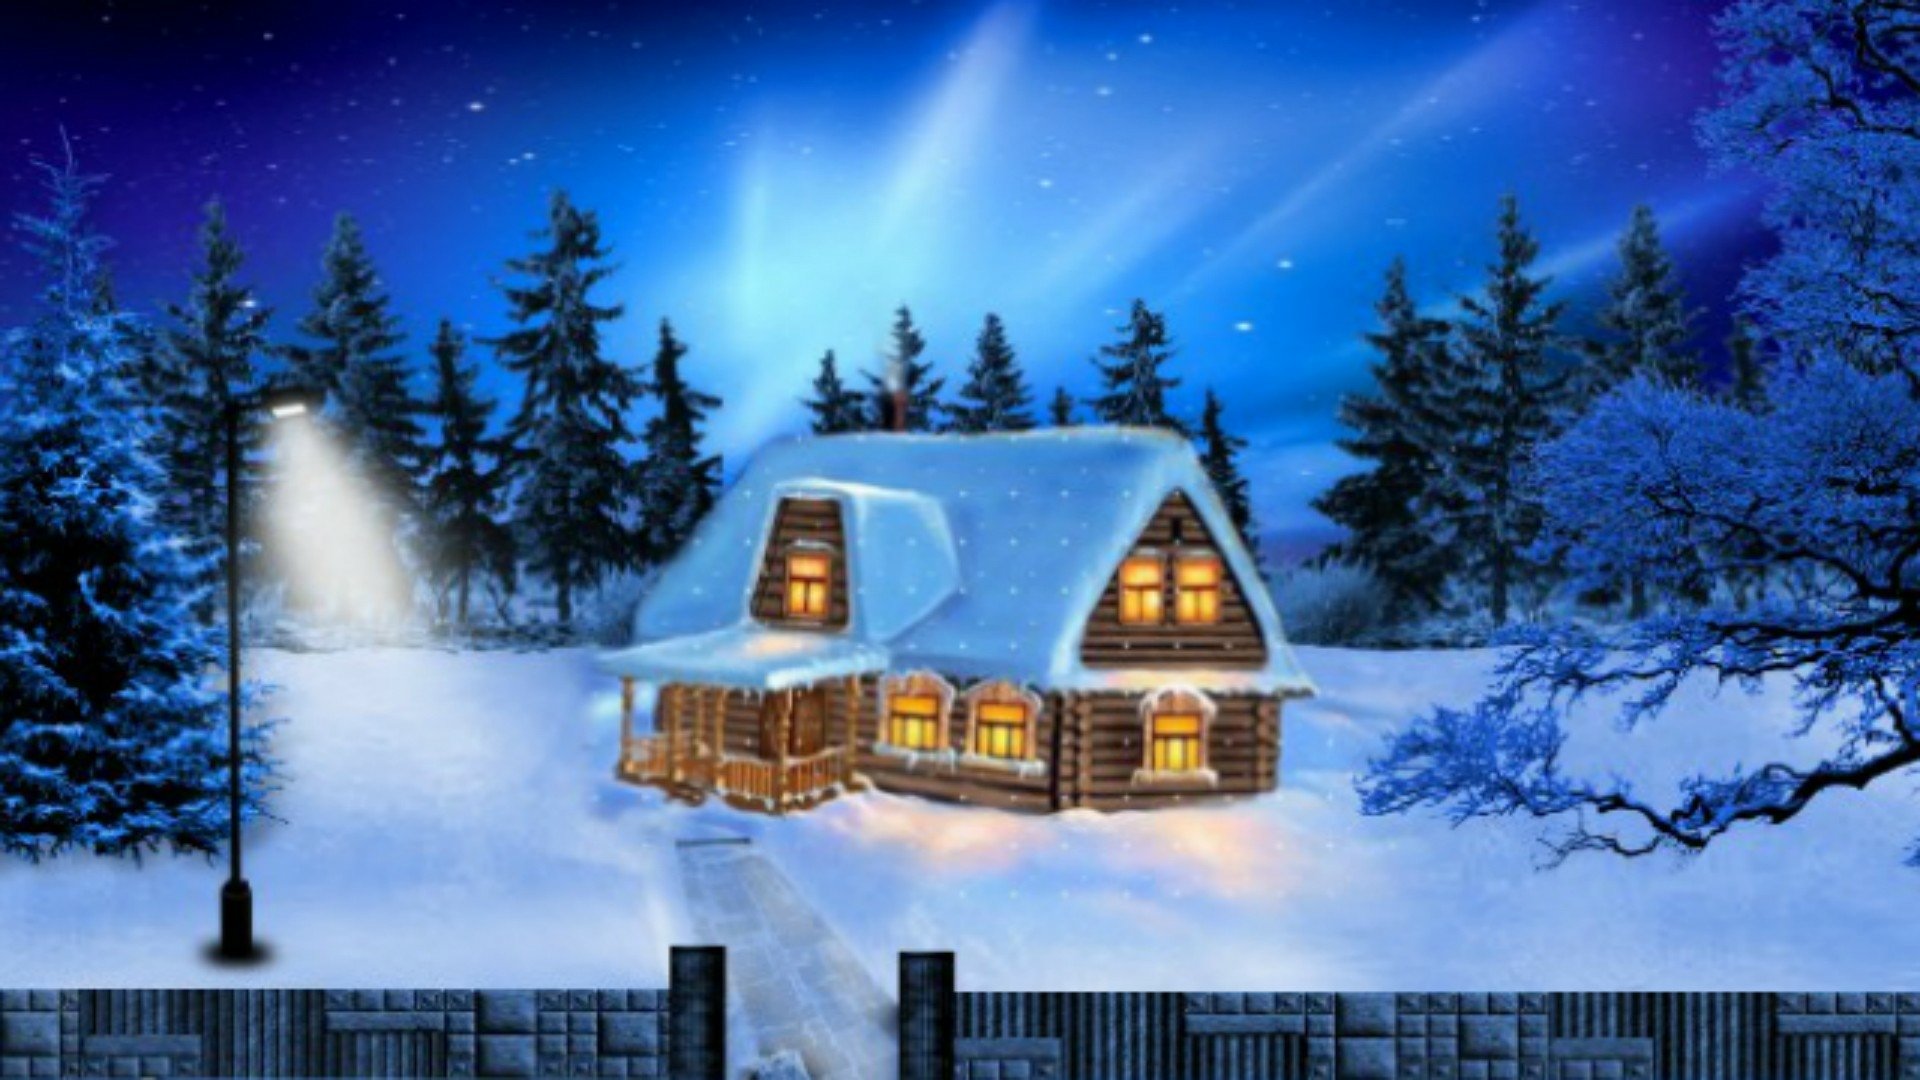 House on Winter Night Image - ID: 7921 - Image Abyss